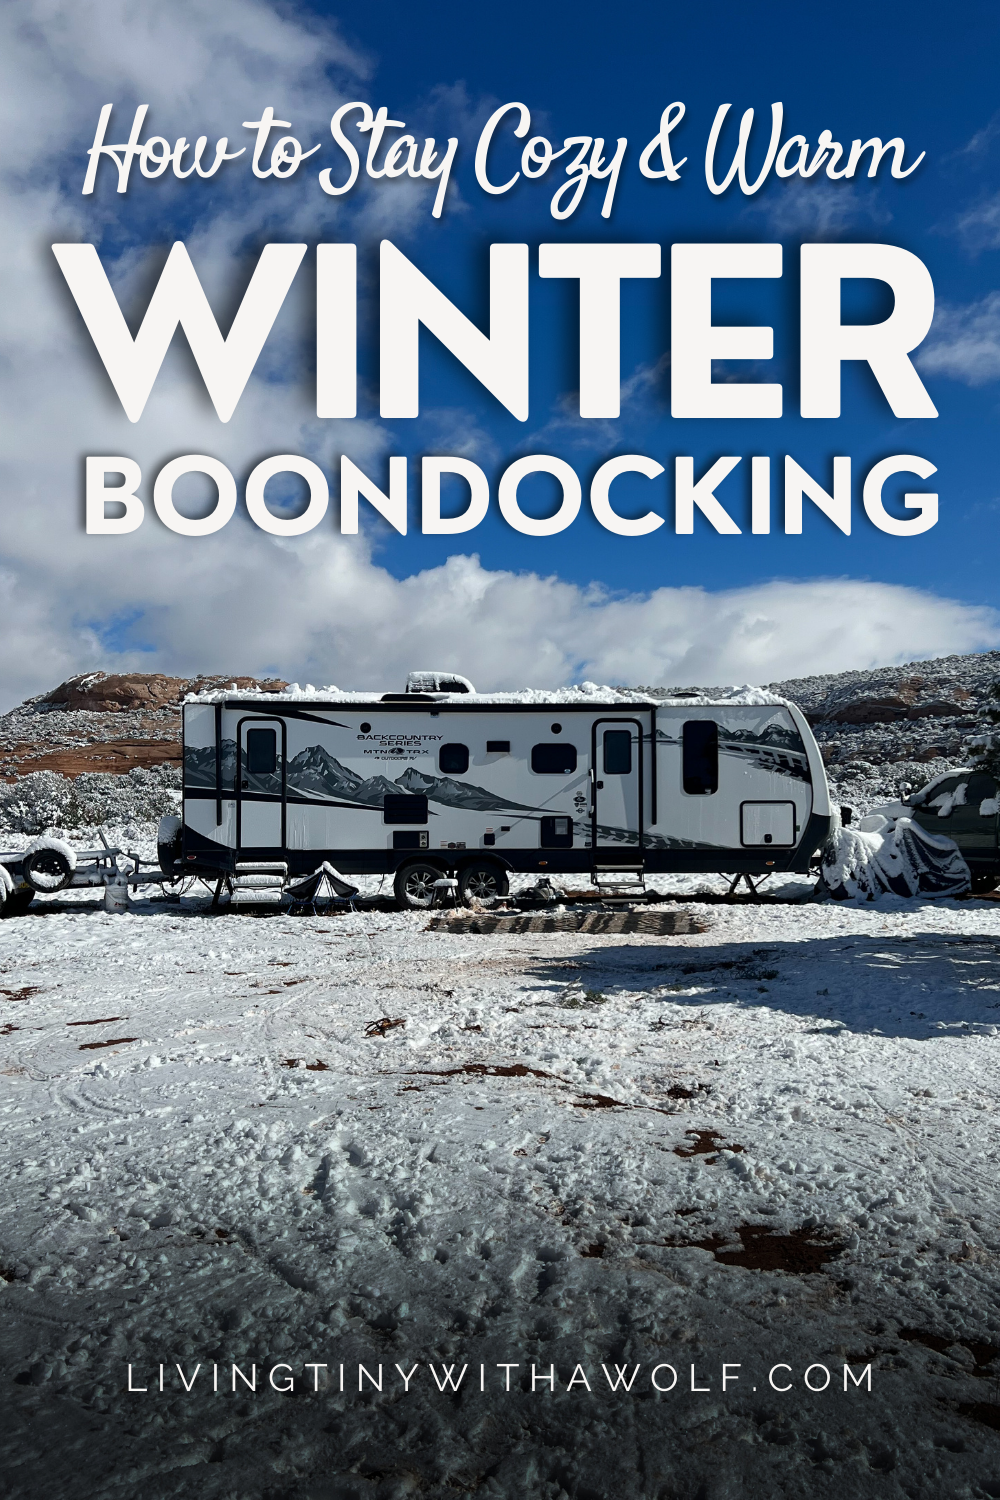 How to Stay Warm & Cozy Boondocking in Winter